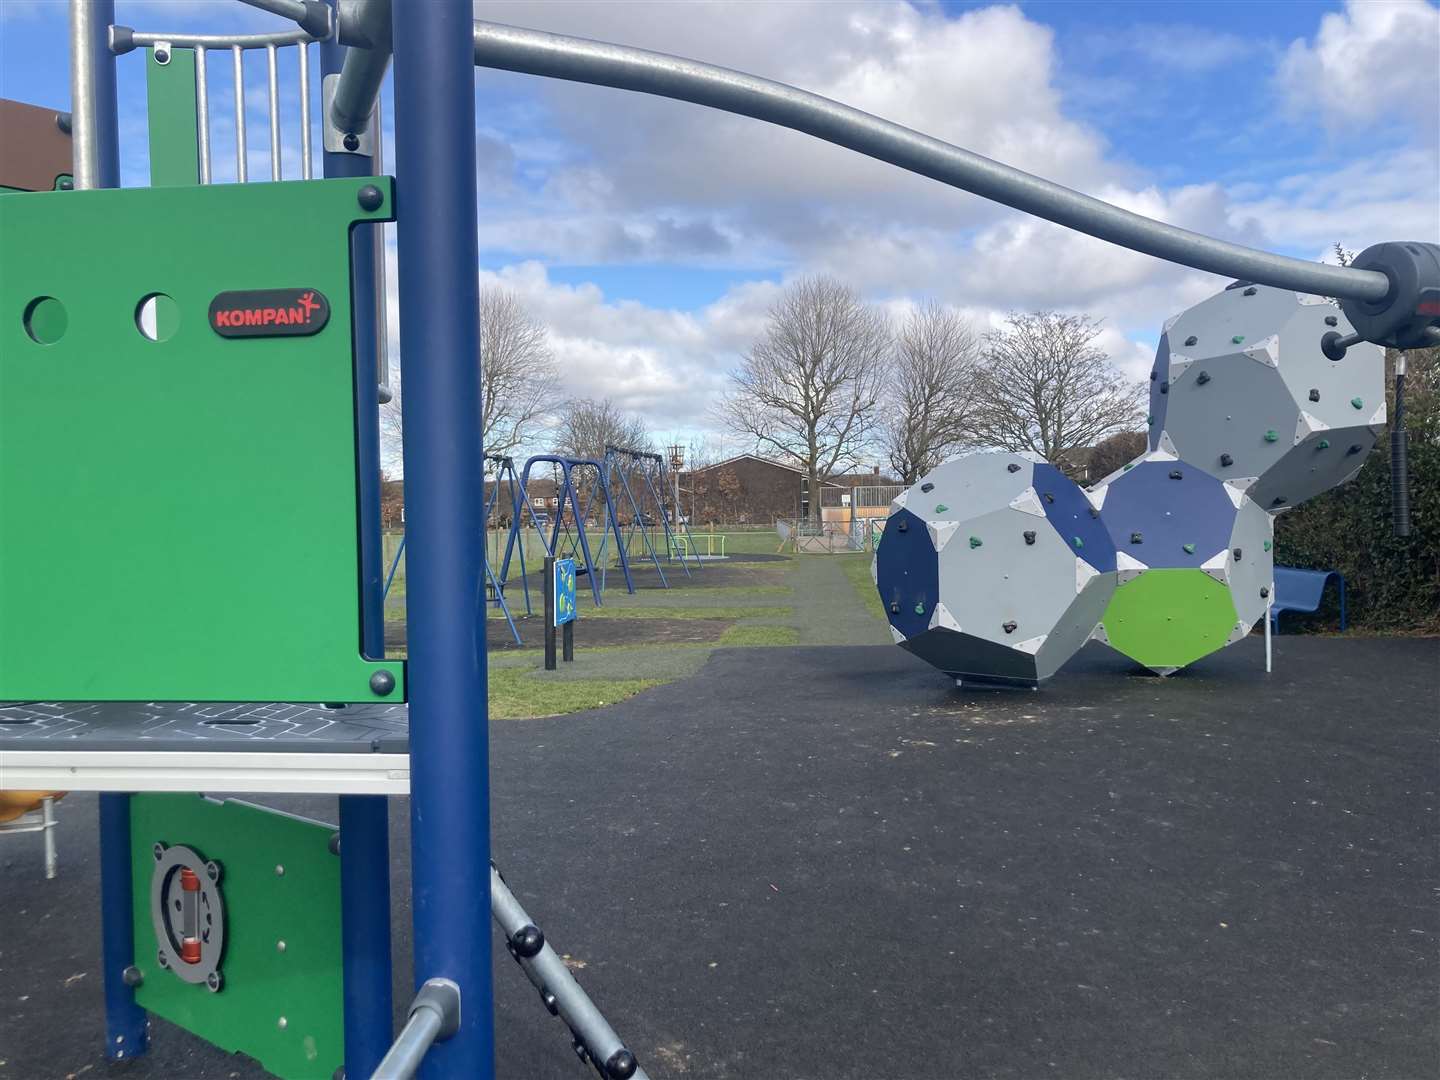 The new play equipment is in Gun Park, Eastry, near Sandwich